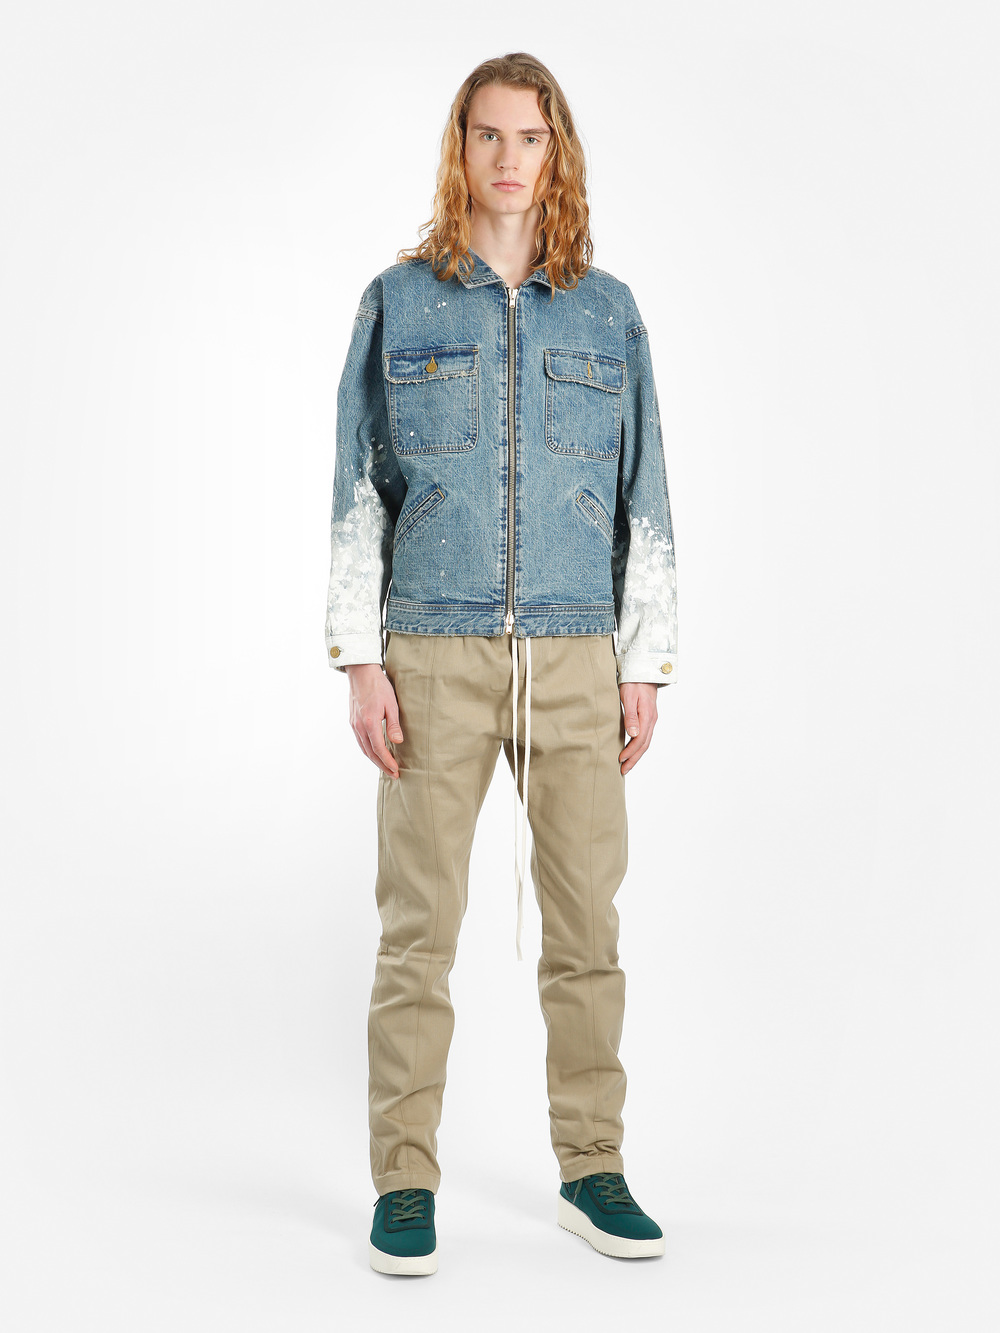 Fear Of God Men's Blue Selvedge Denim Work Jacket With Painted Sleeves ...